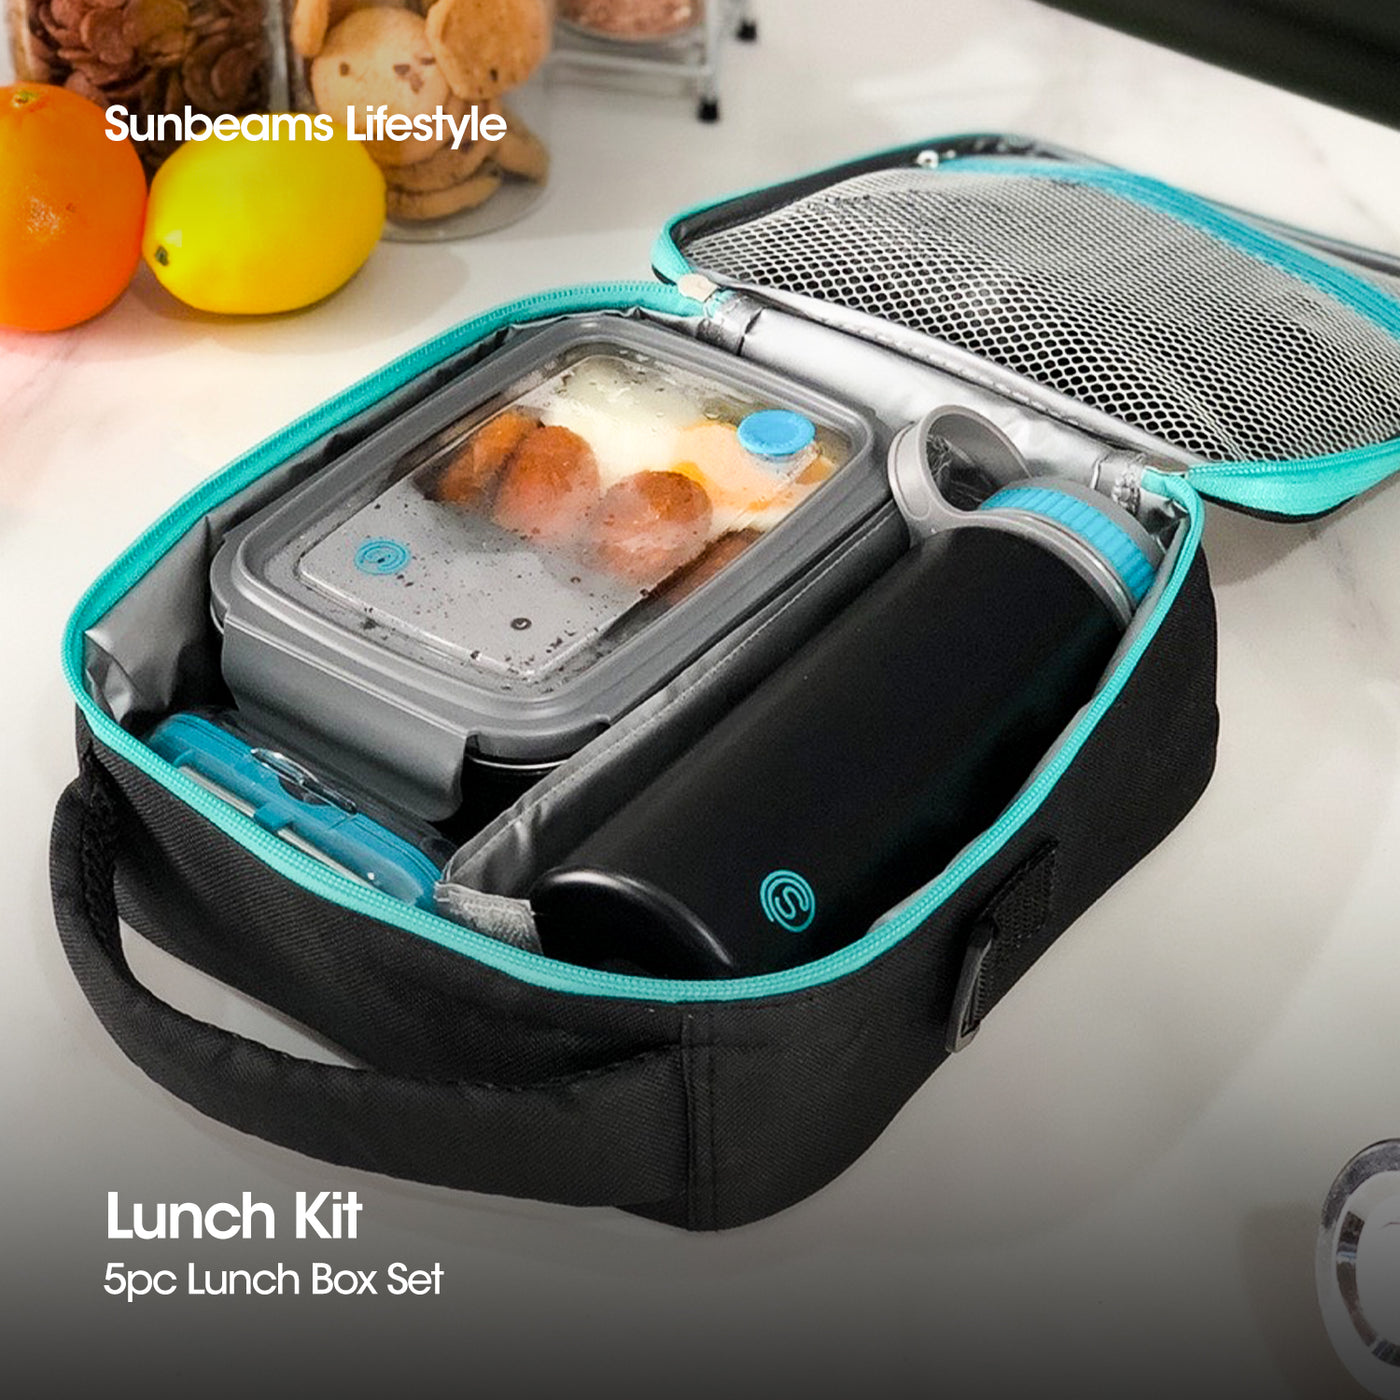 SLIQUE Premium Lunch Box Insulated Water Proof Thermal Bag w/ Detachable Shoulder Strap Stainless Steel Set of 5- Black